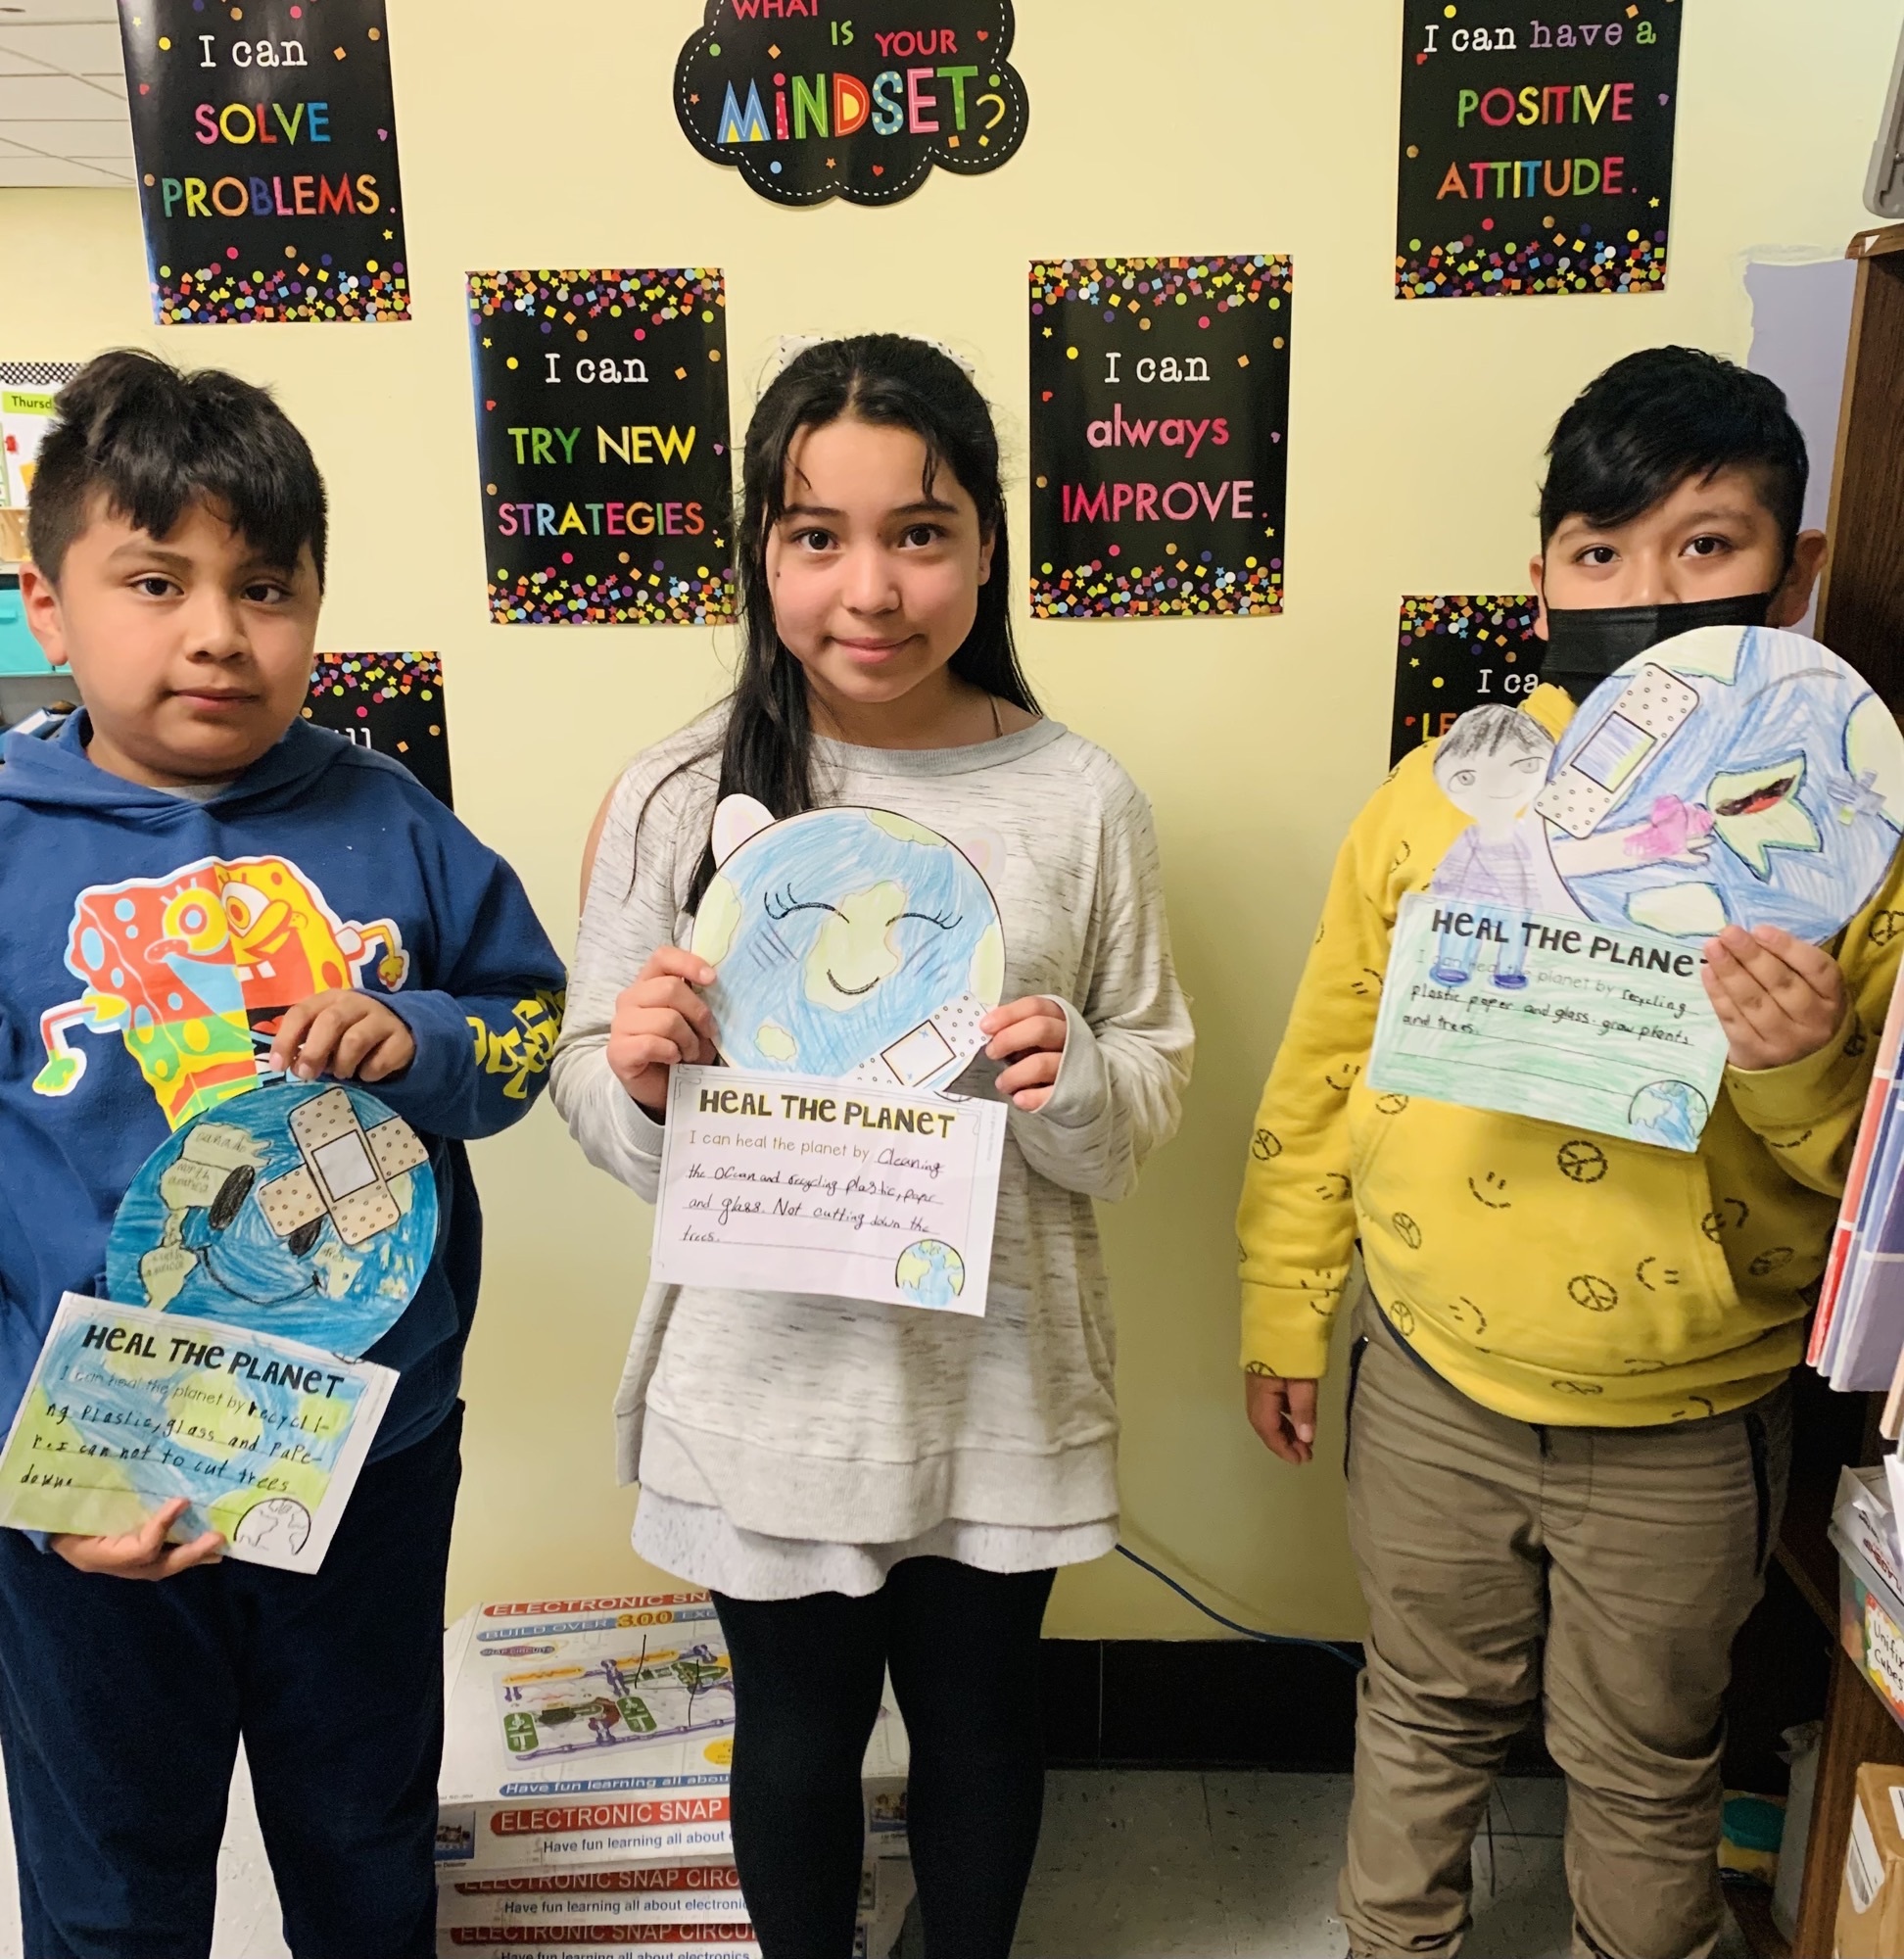 To mark Earth Day, Hampton Bays Elementary School fourth graders in Krista Savino’s class discussed and wrote about different ways that they can help heal the planet and solve issues such as pollution and litter. COURTESY HAMPTON BAYS SCHOOL DISTRICT